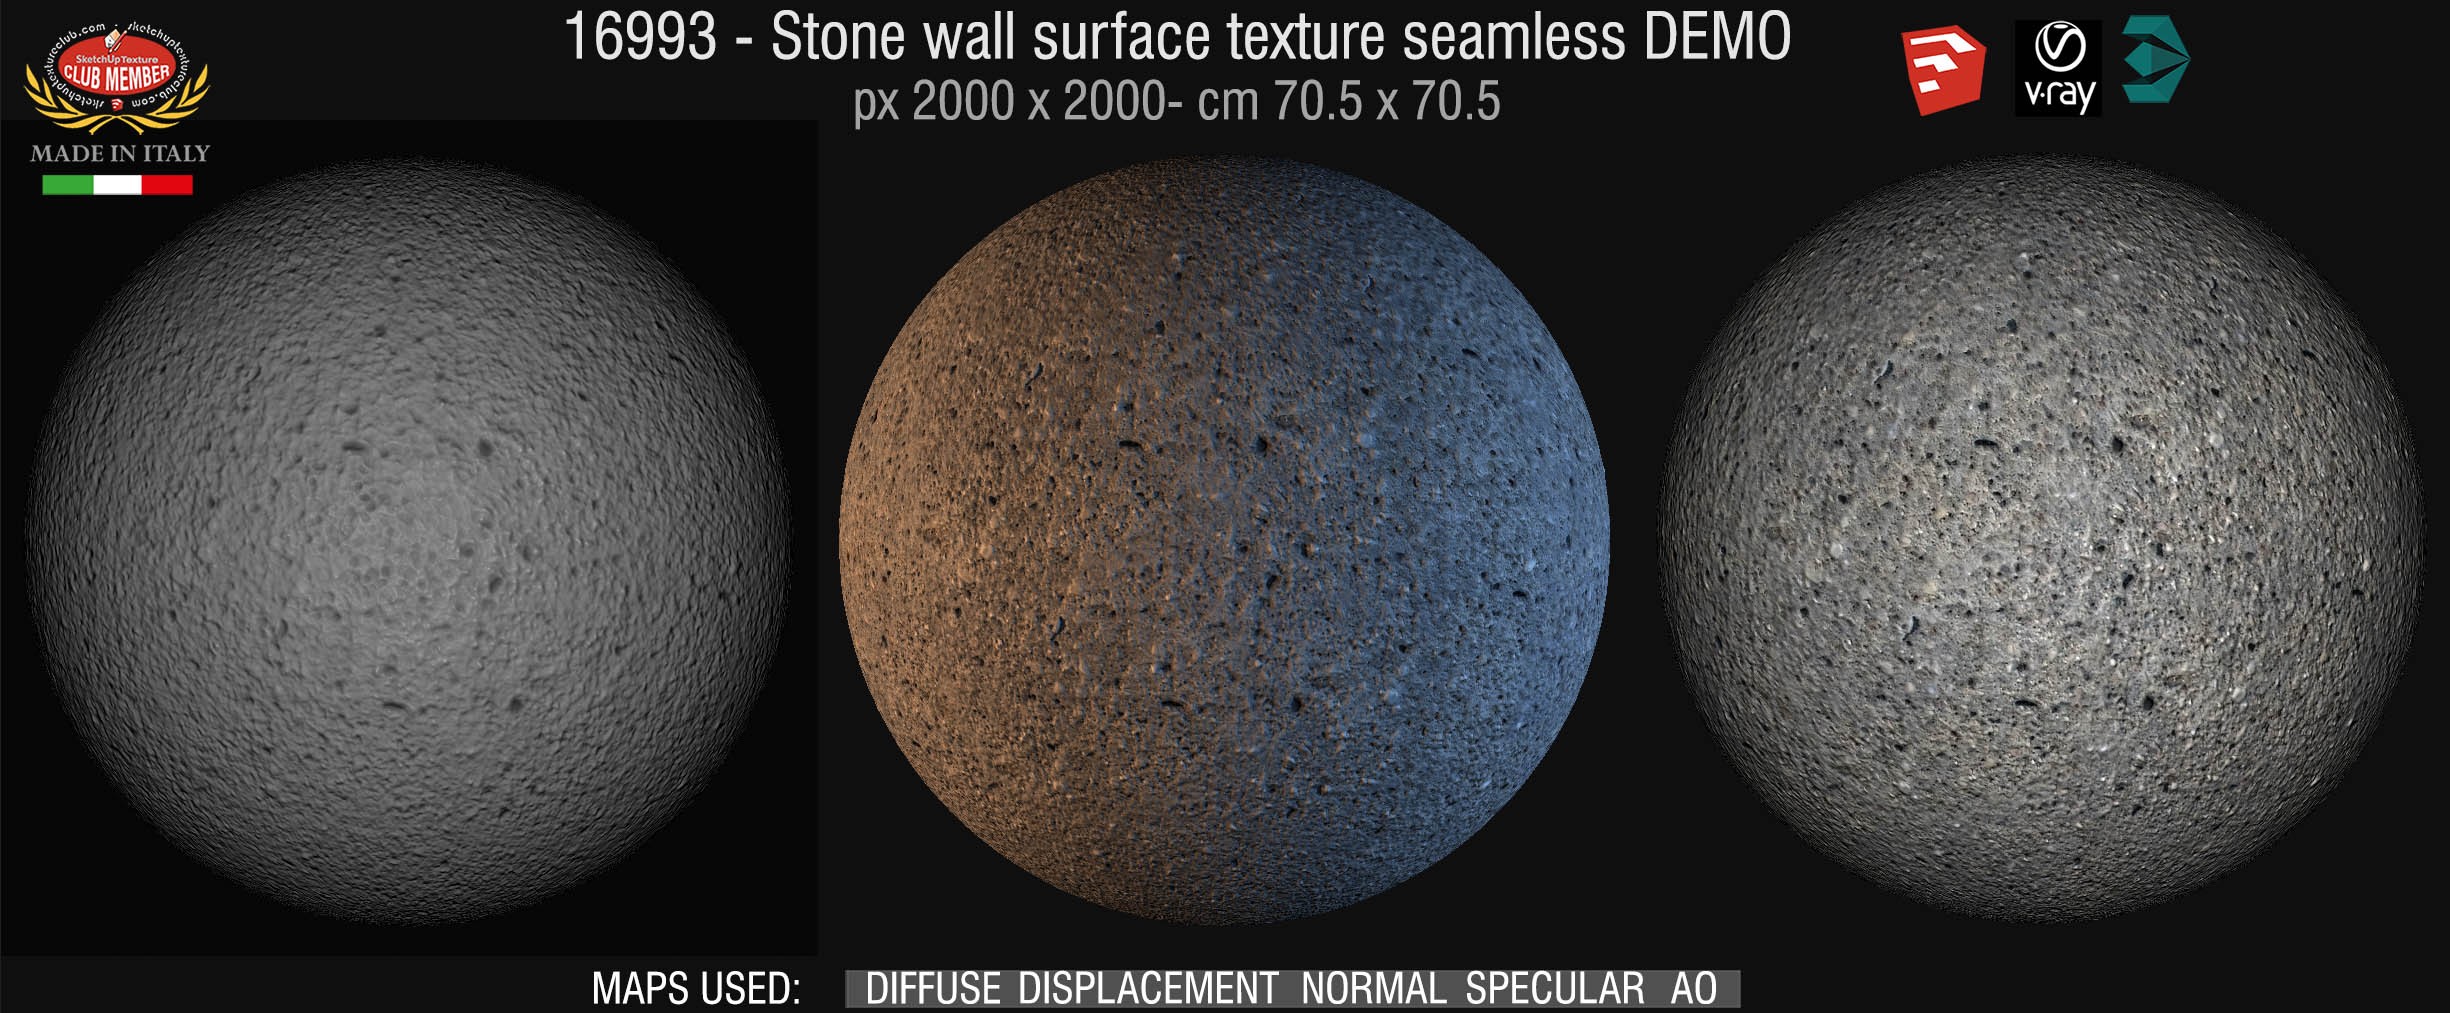 16993 Stone wall surface texture seamless + maps DEMO